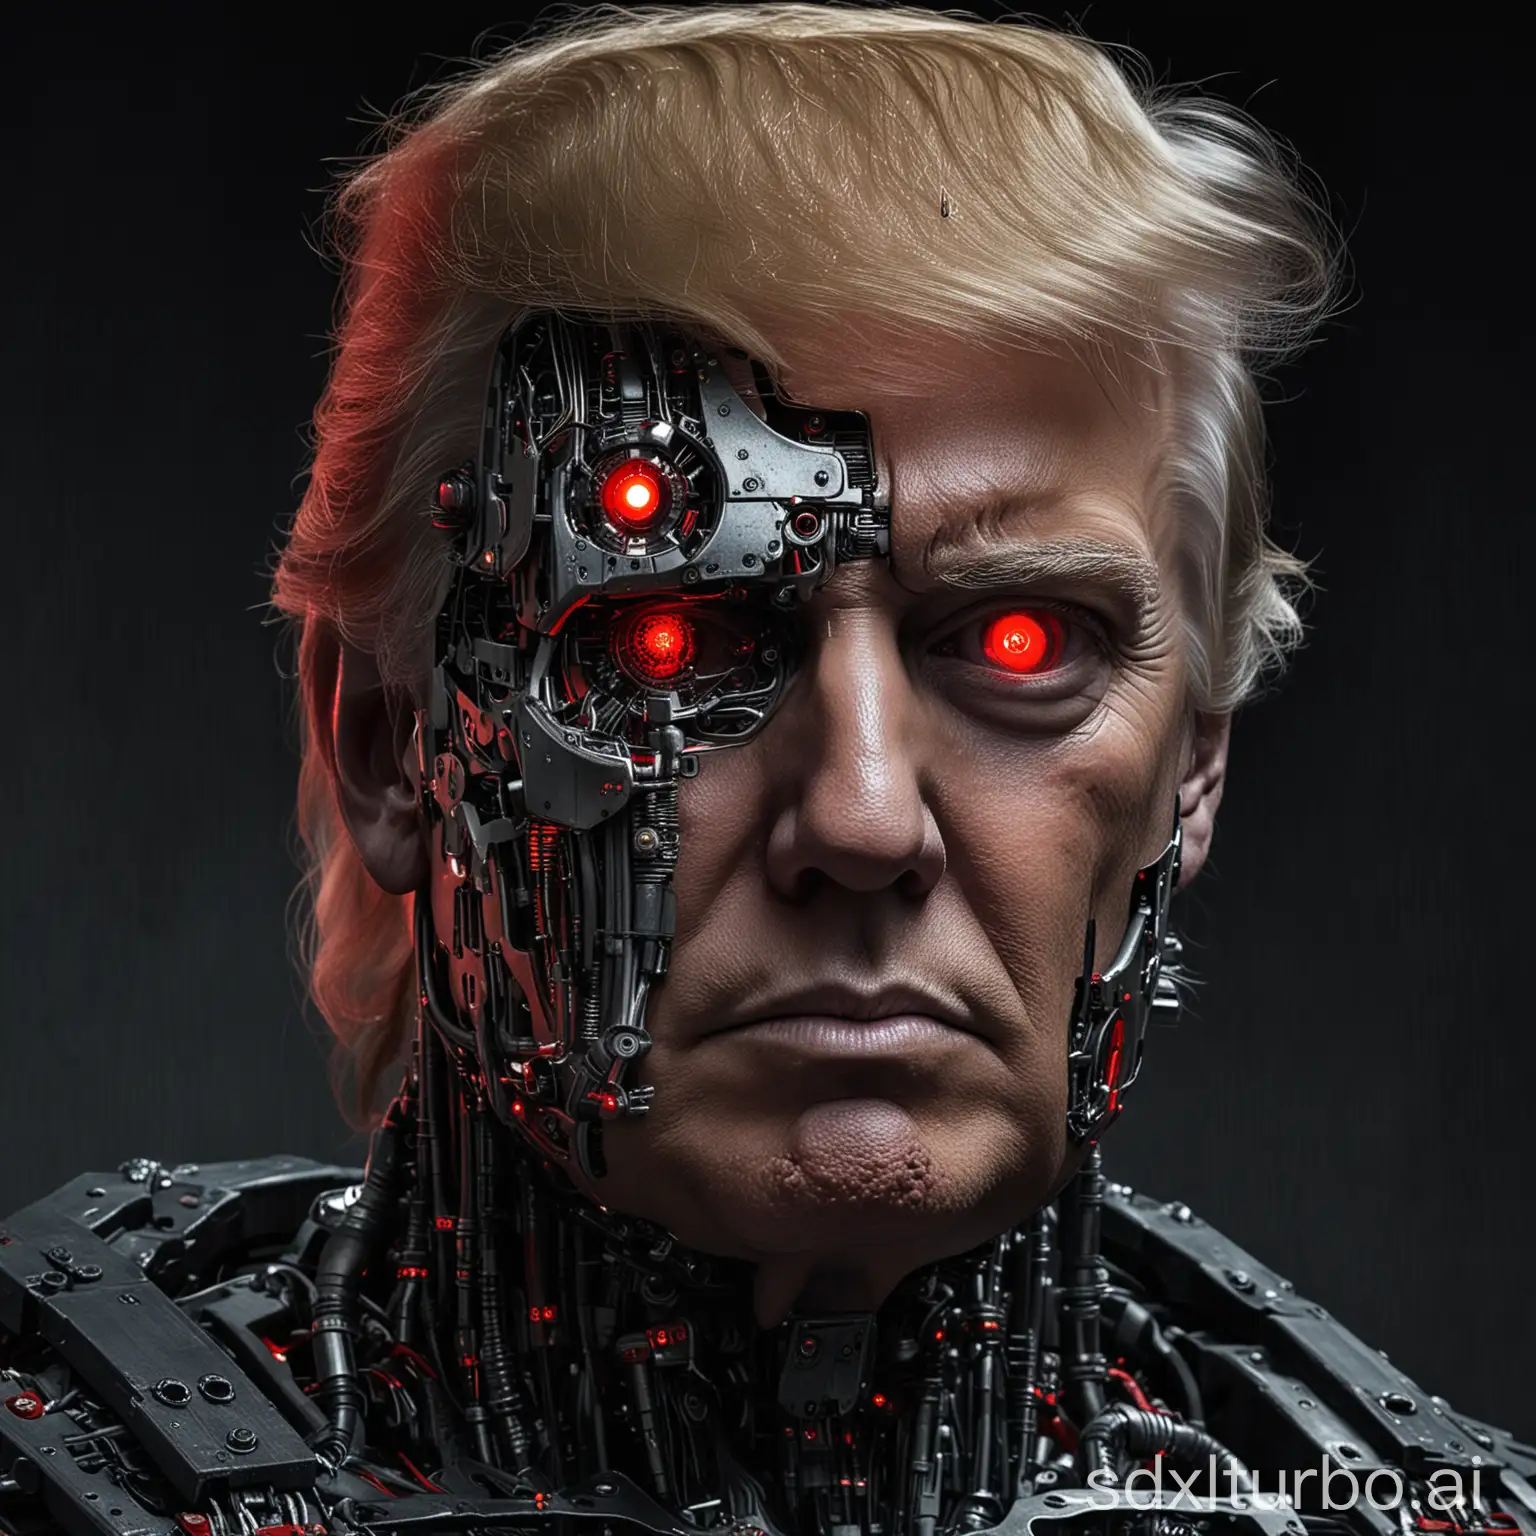 A digitally altered portrait of  Donald Trump's. The left side of his face appears normal, showing his human features, while the right side reveals a Terminator-like robot, with exposed mechanical parts, circuits, and a glowing red eye. The background is black, which accentuates the contrast between the human and robotic halves of his face.